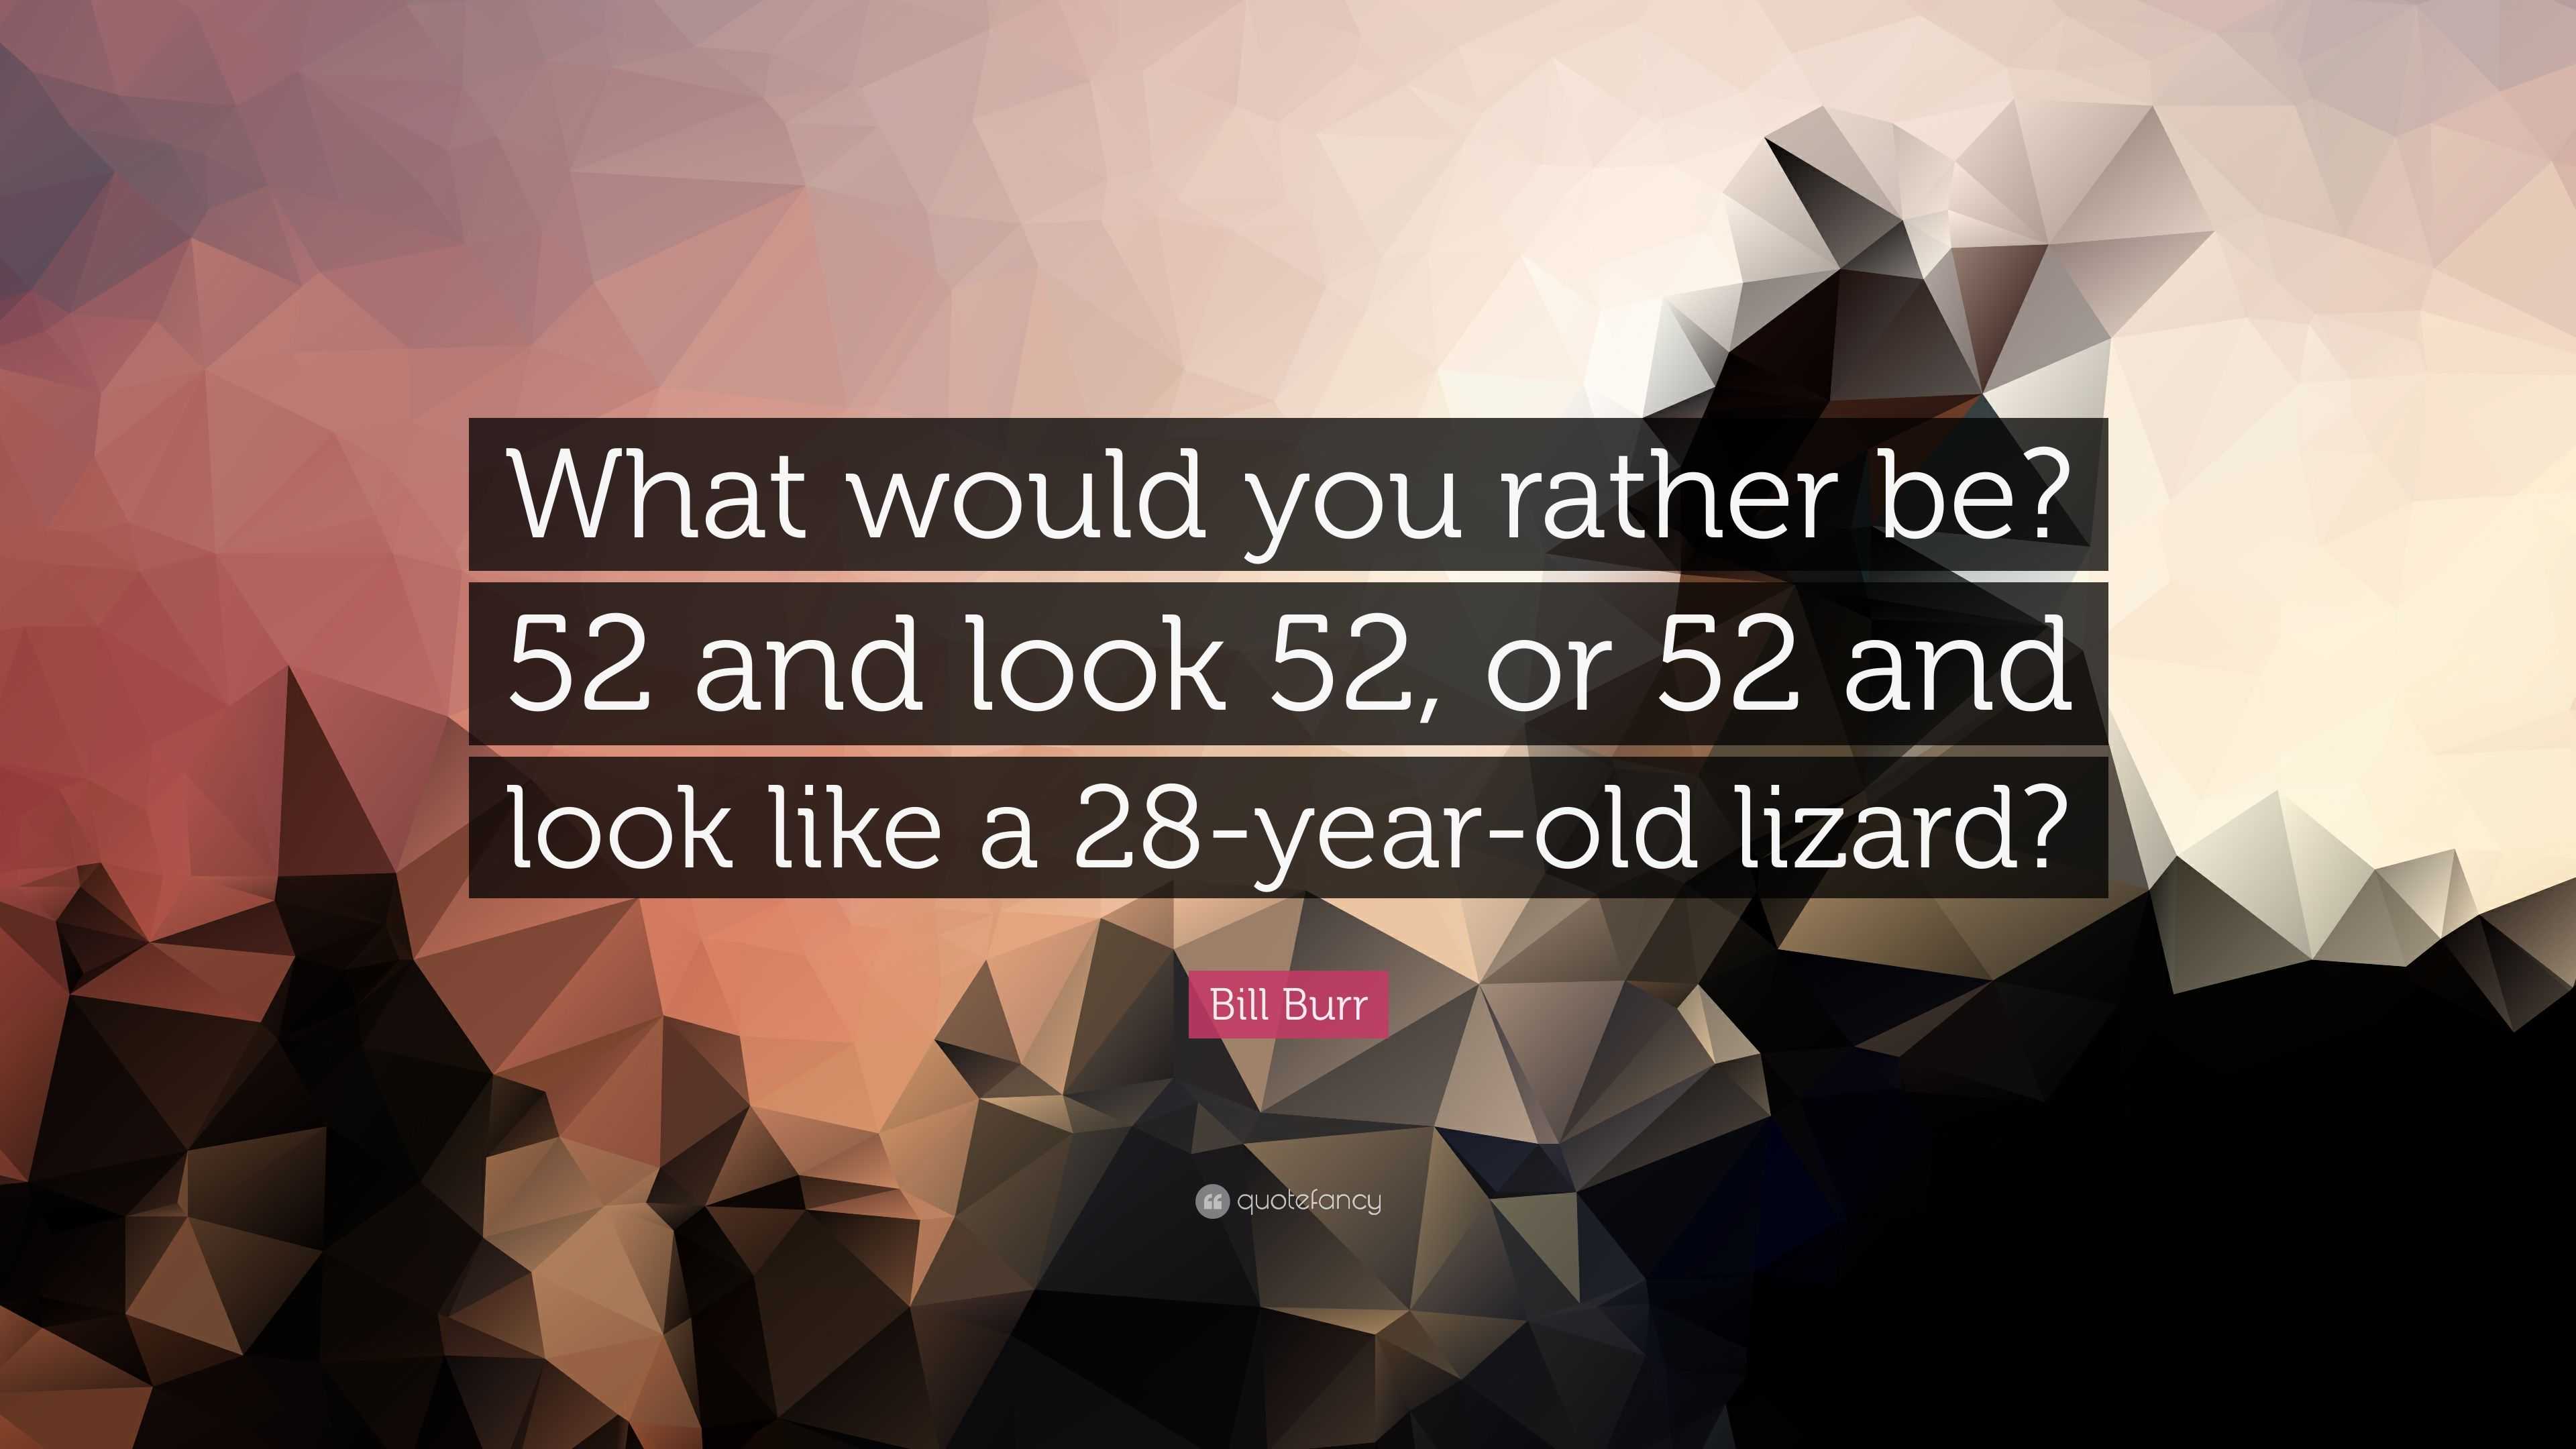 https://quotefancy.com/media/wallpaper/3840x2160/5369027-Bill-Burr-Quote-What-would-you-rather-be-52-and-look-52-or-52-and.jpg